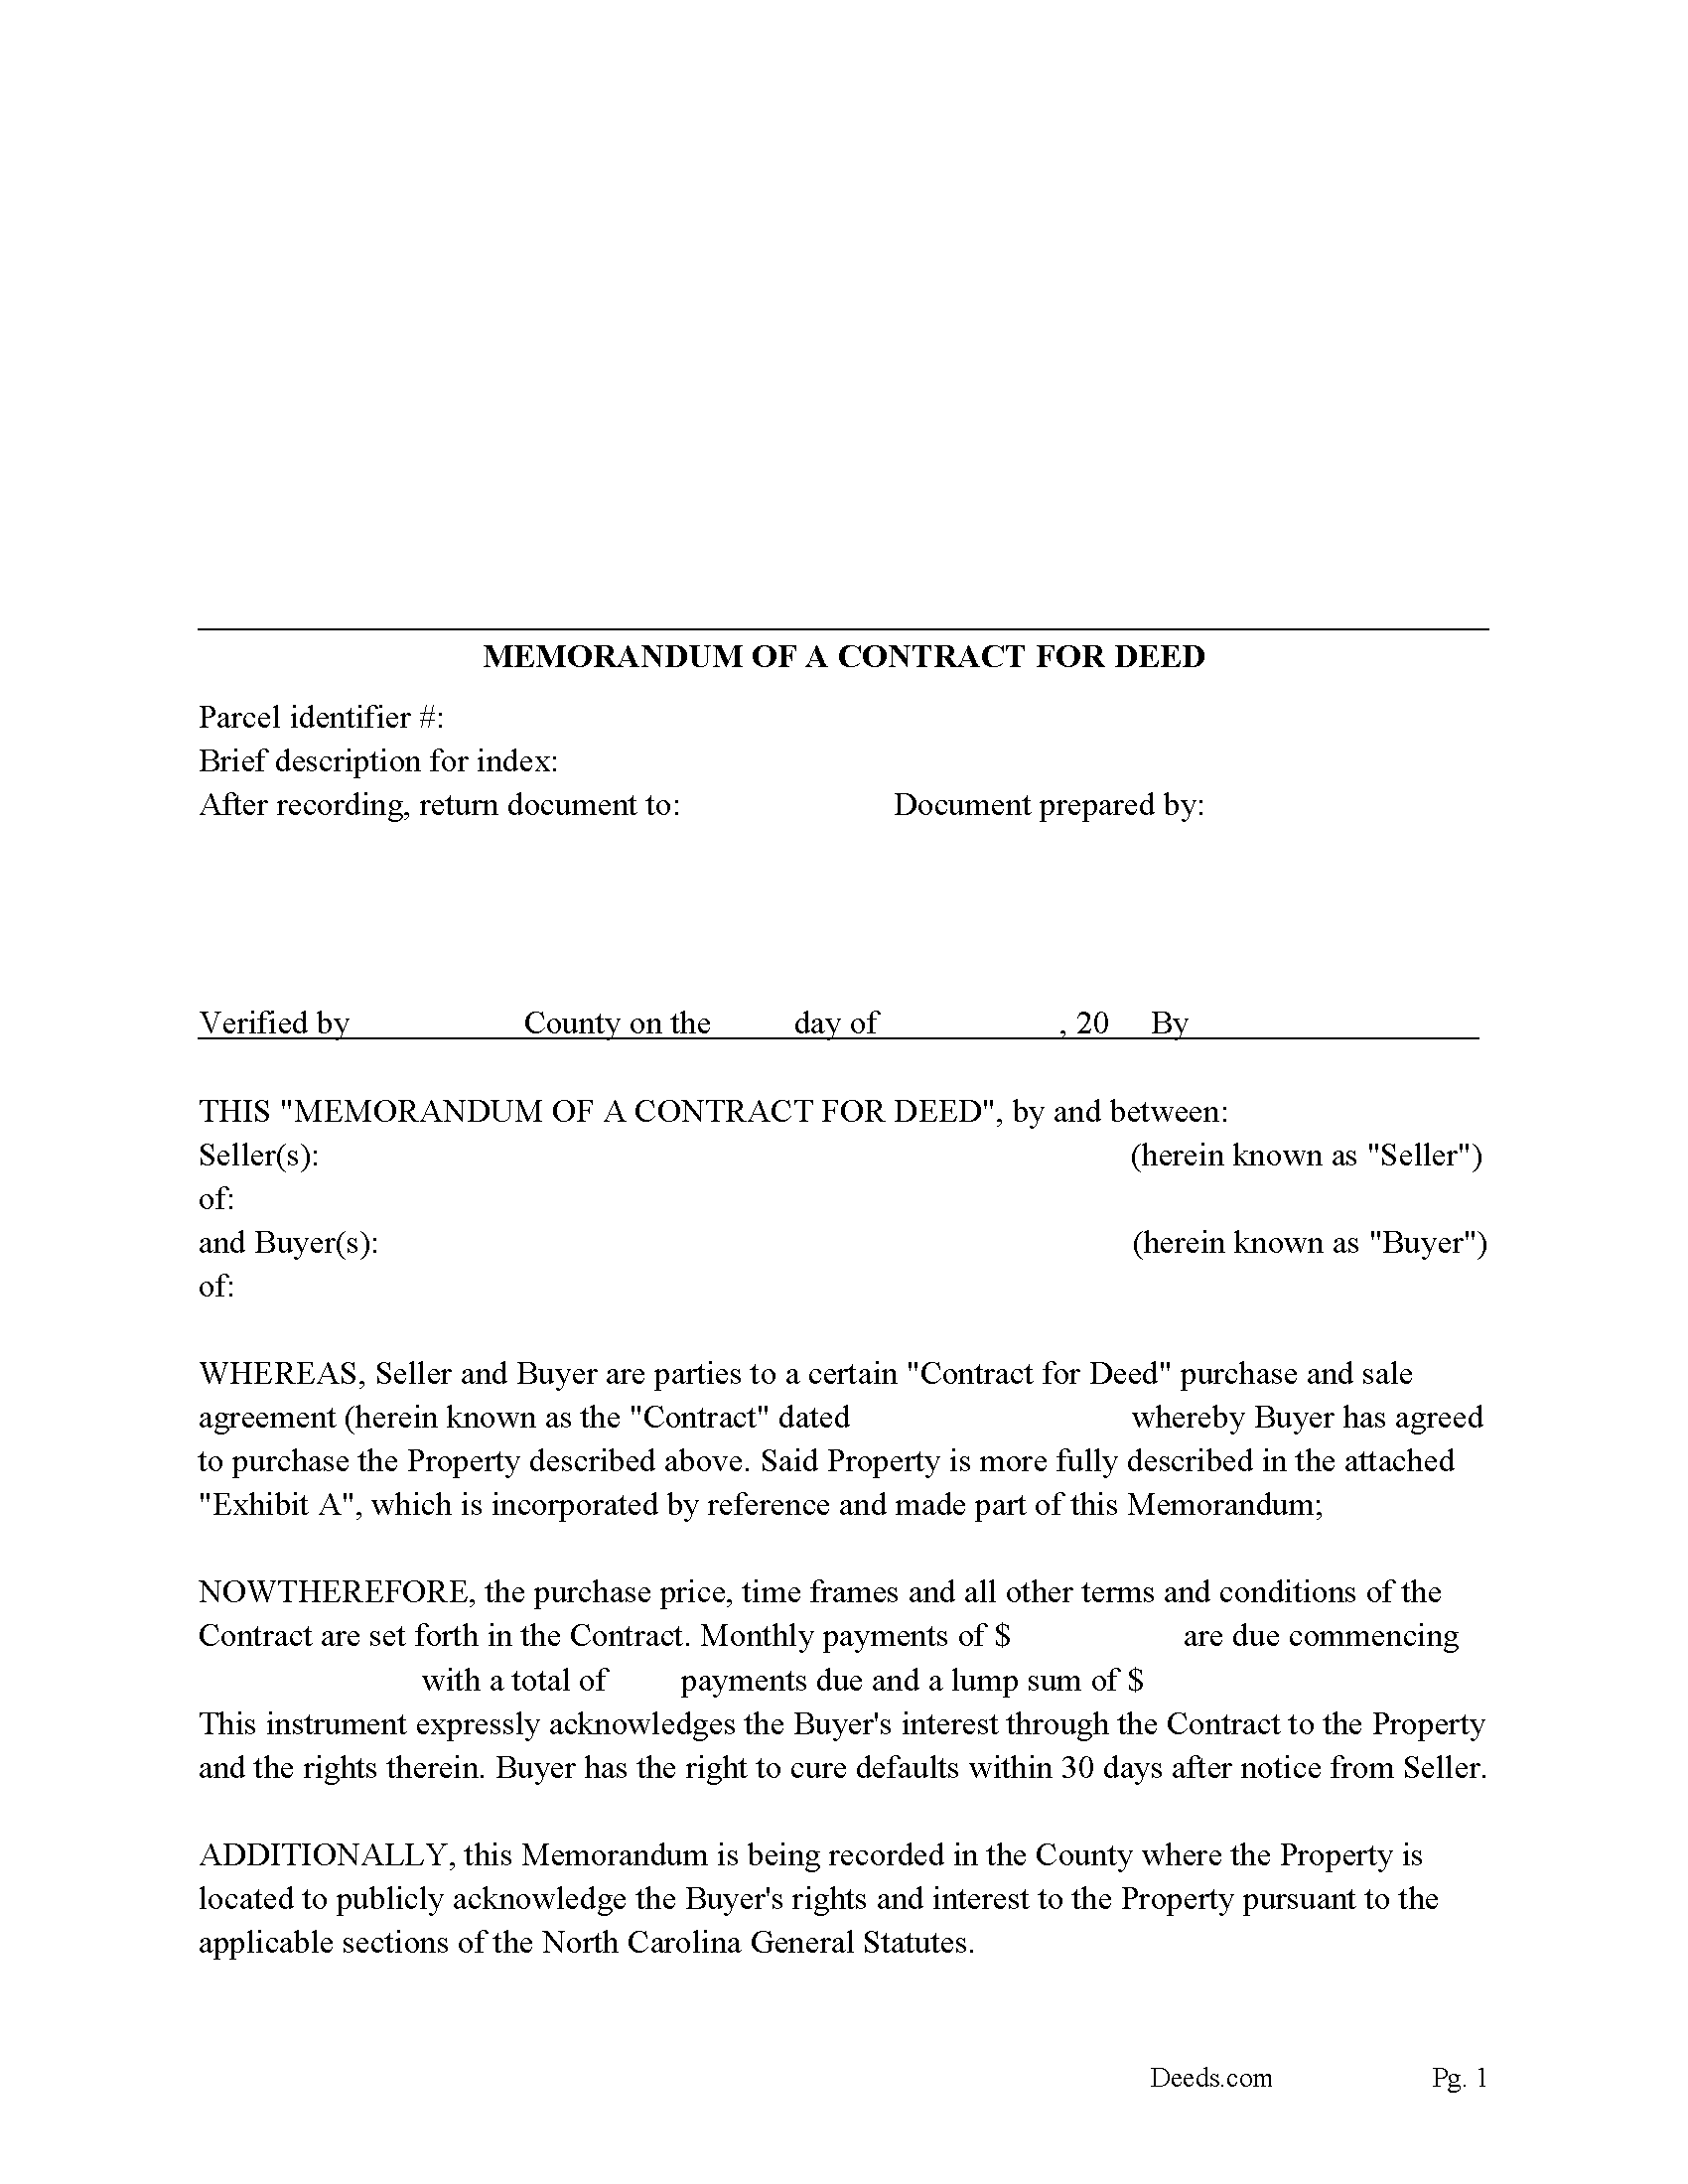 Memorandum of a Contract for Deed Form